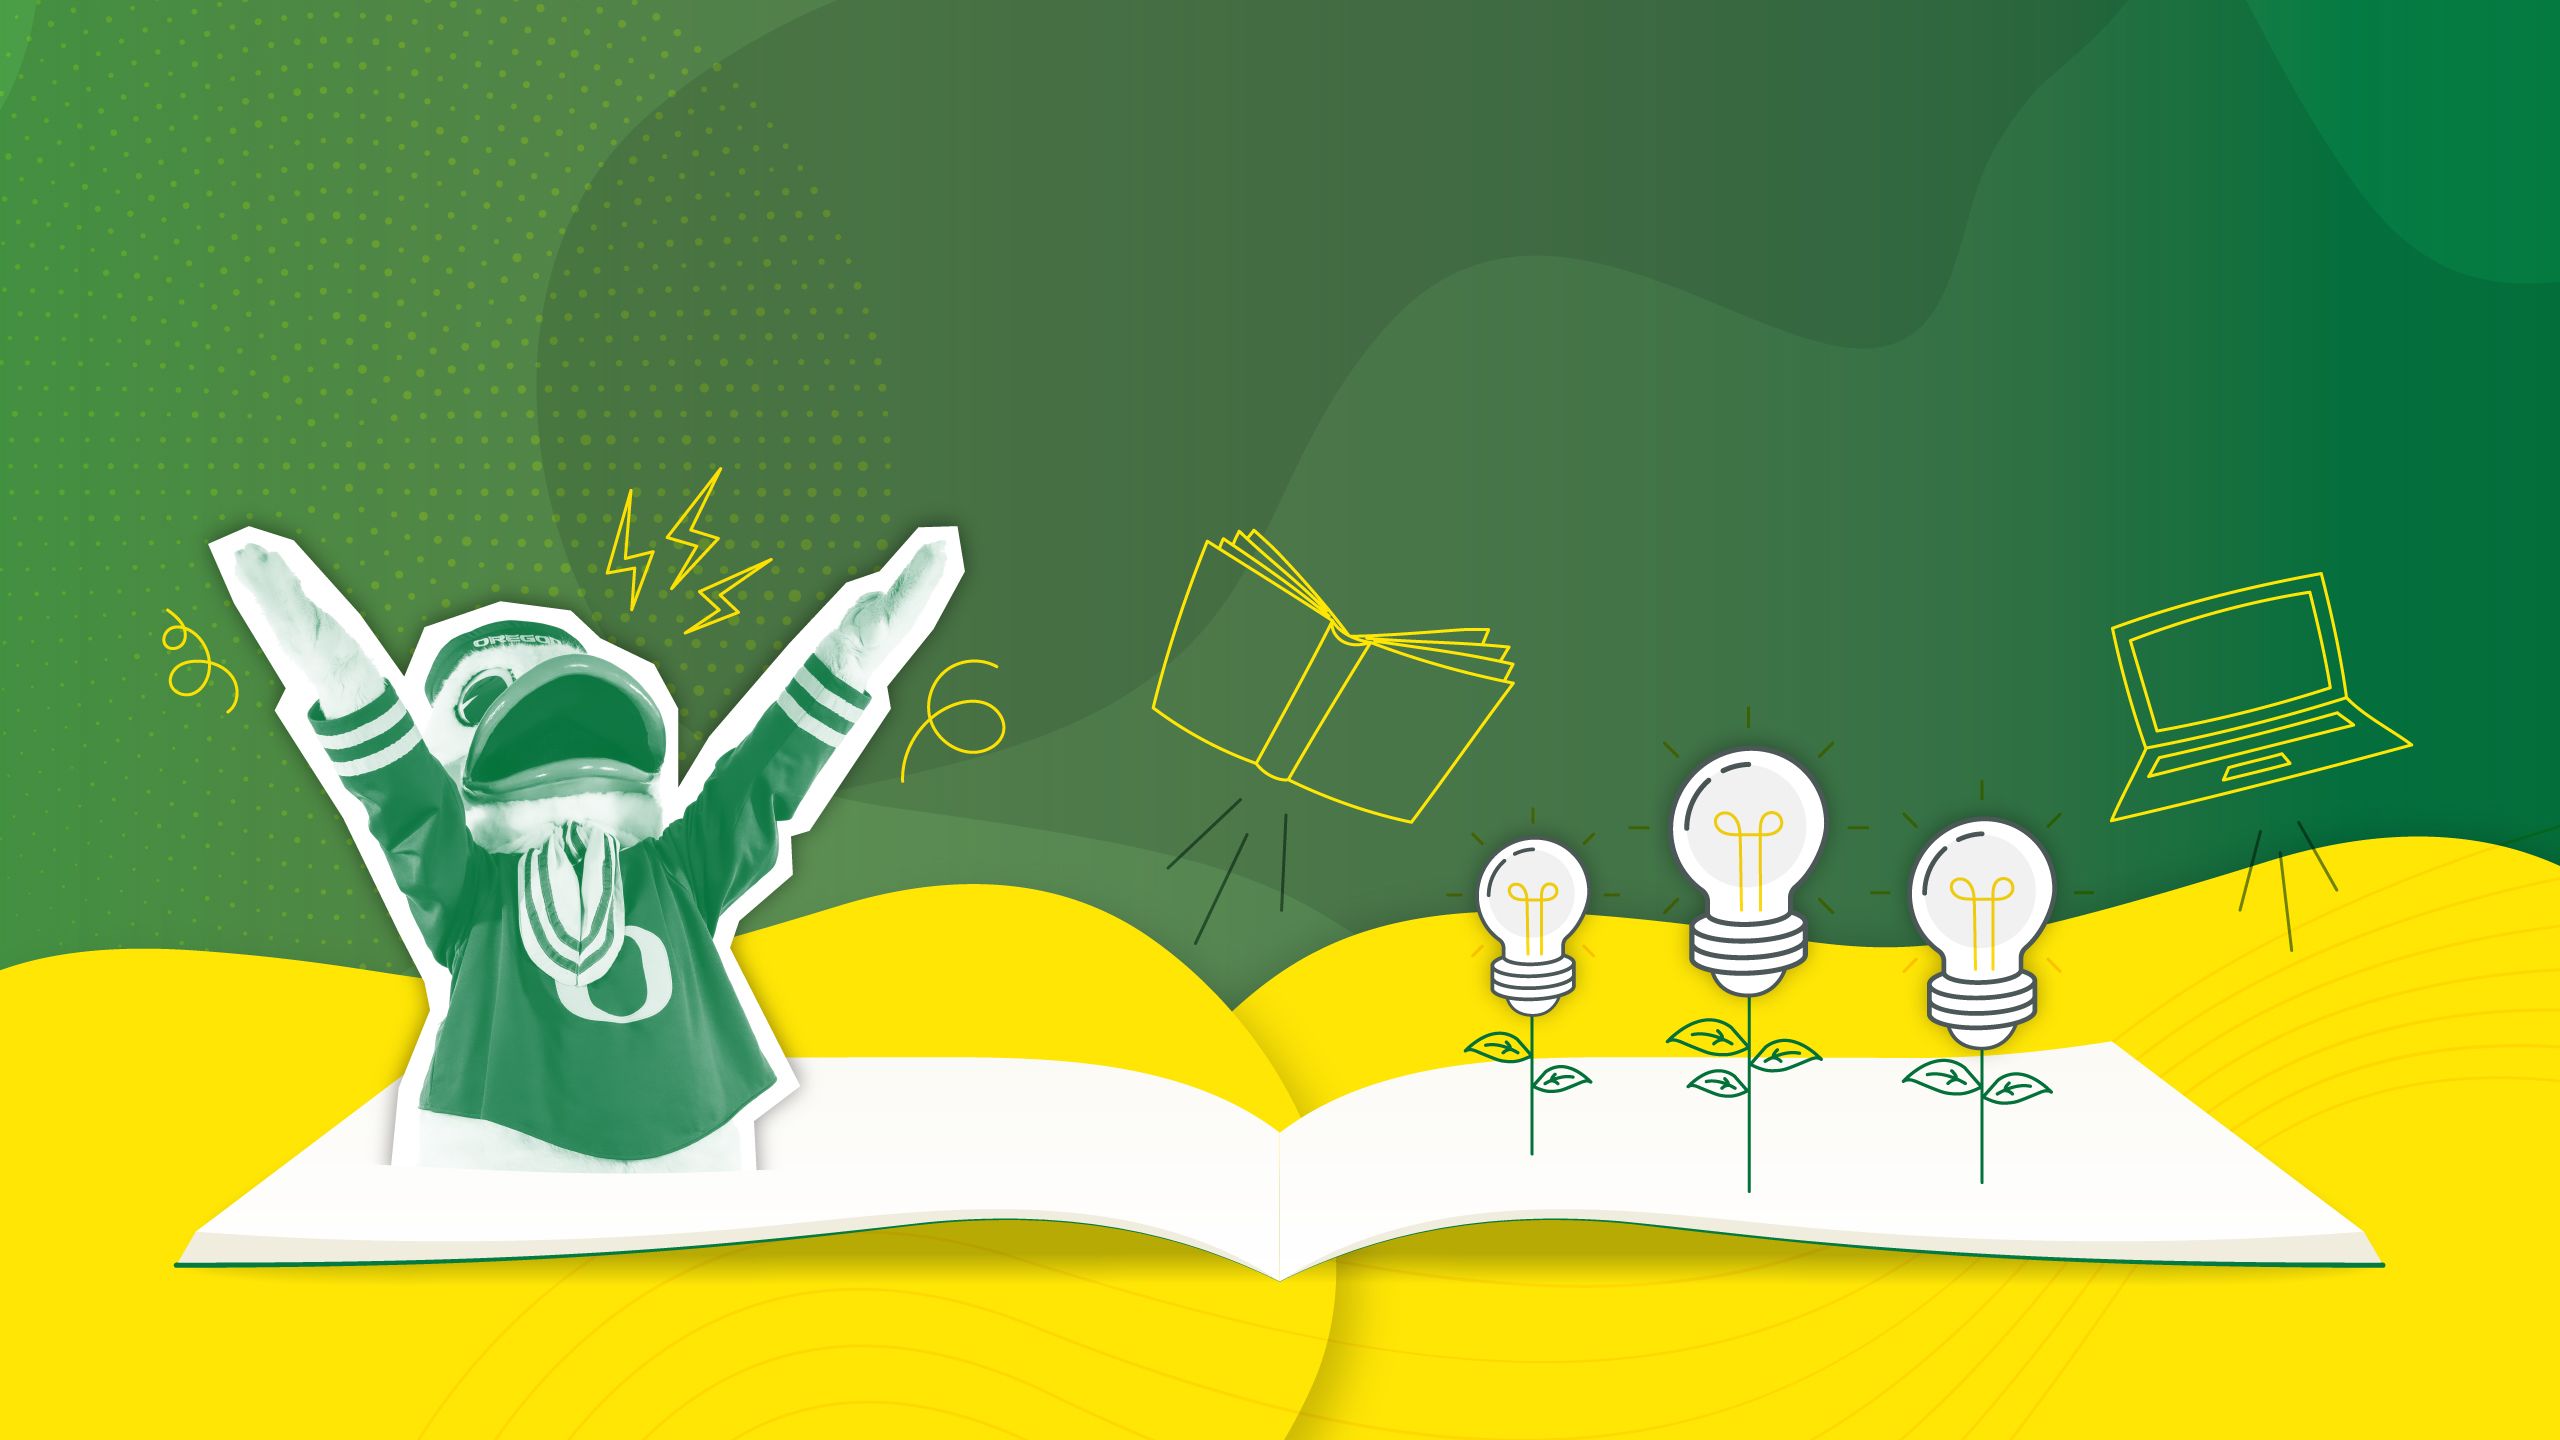 An image of the University of Oregon Duck mascott, an open book and computer flying, and light bulbs growing as flowers.